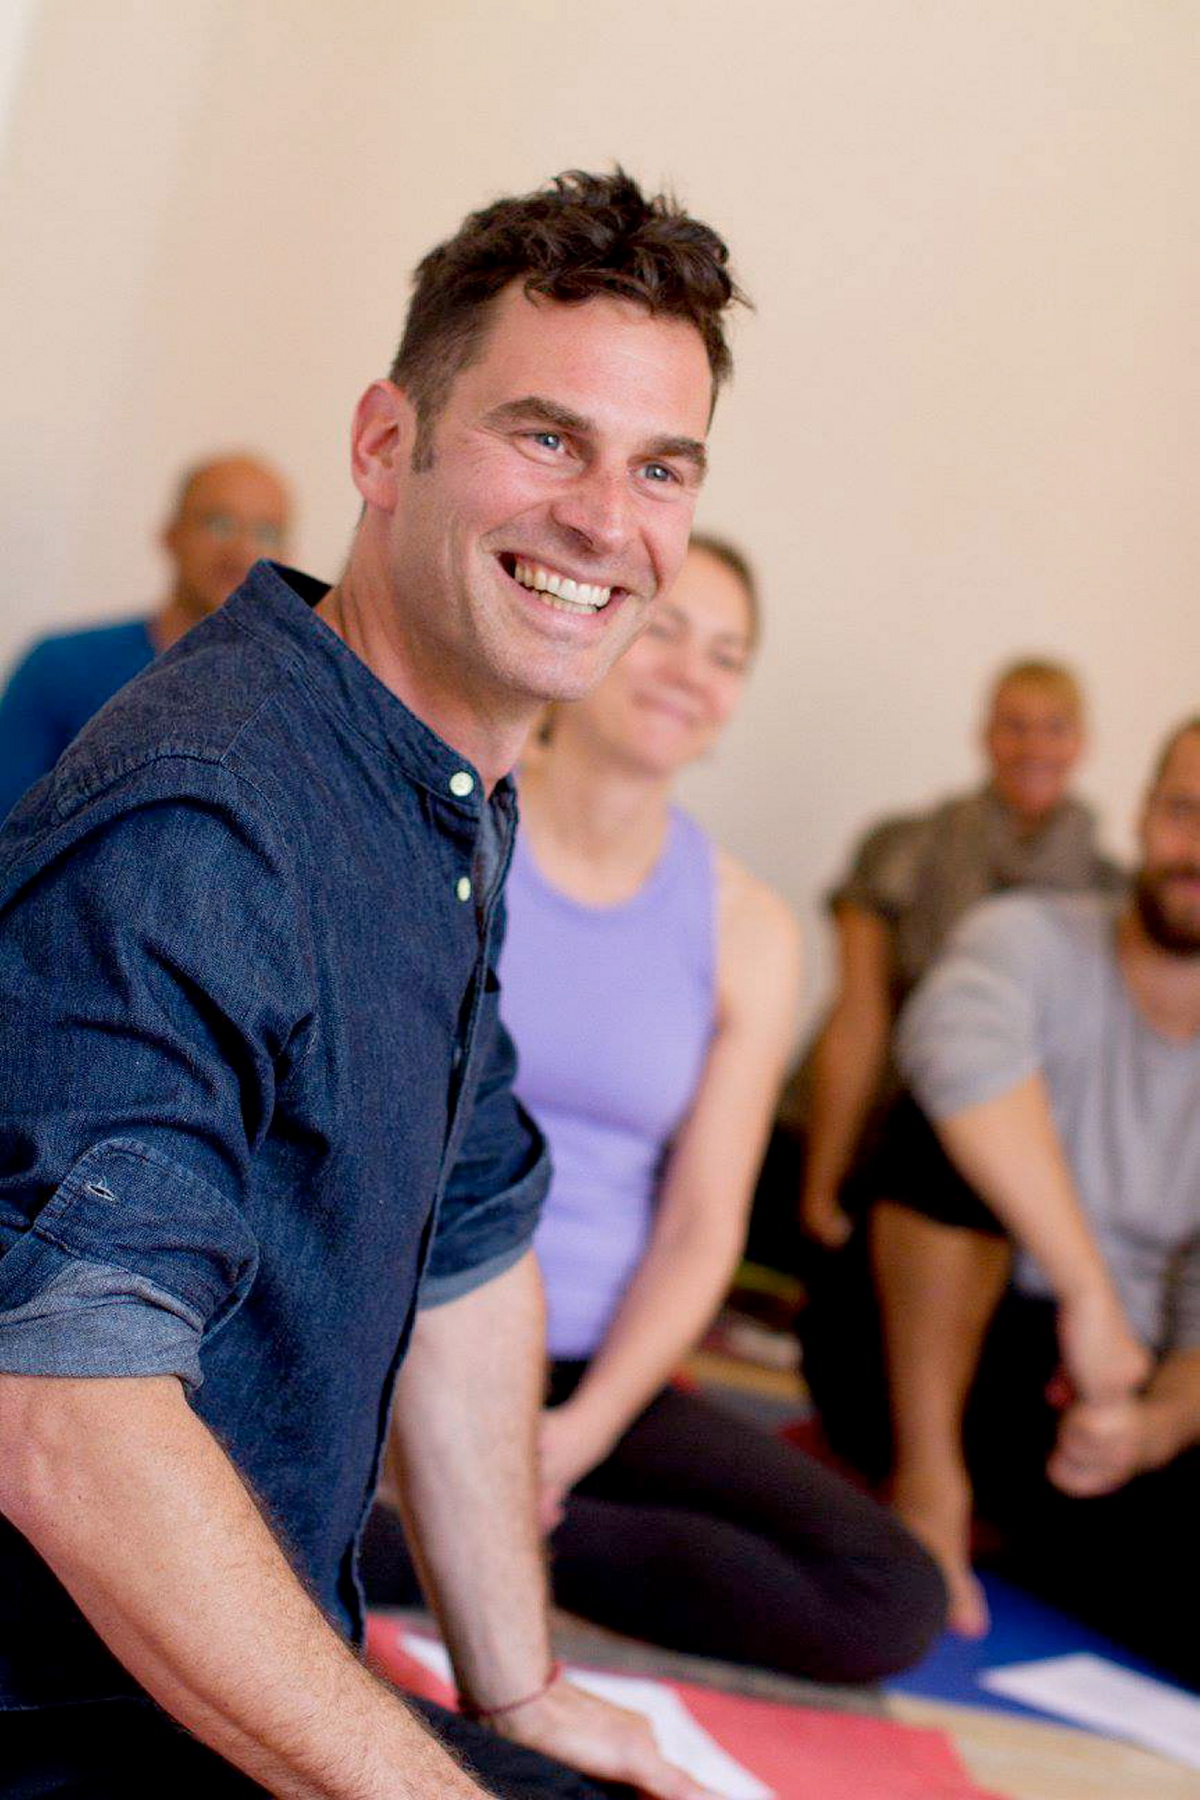 Yoga innovator, author dies in Victoria at 42 - Victoria Times Colonist